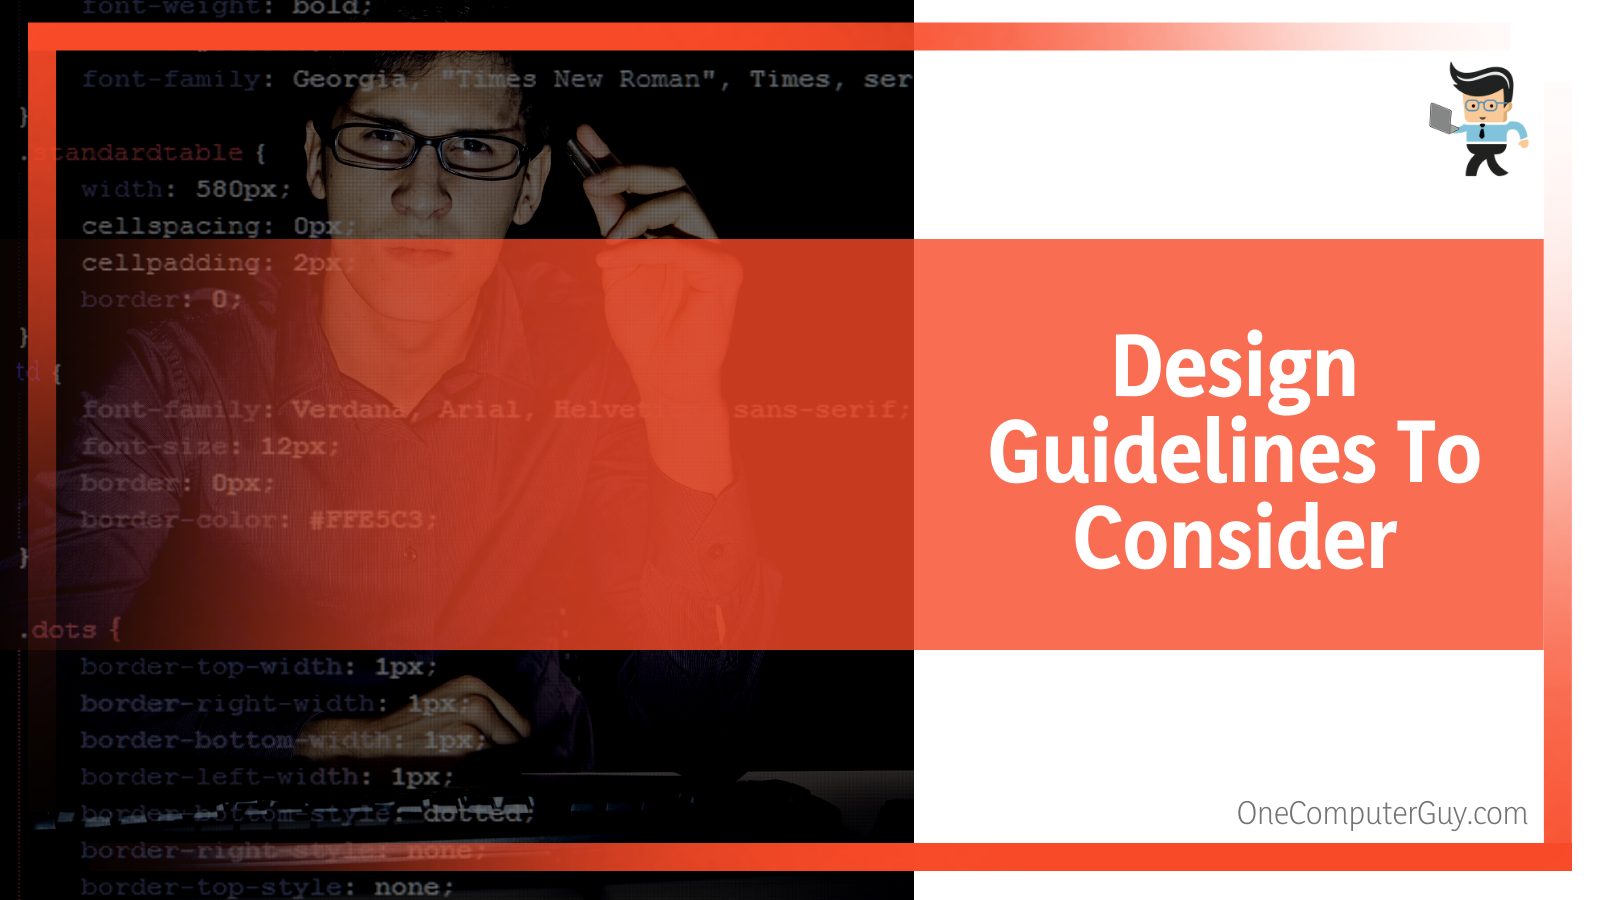 Design Guidelines To Consider